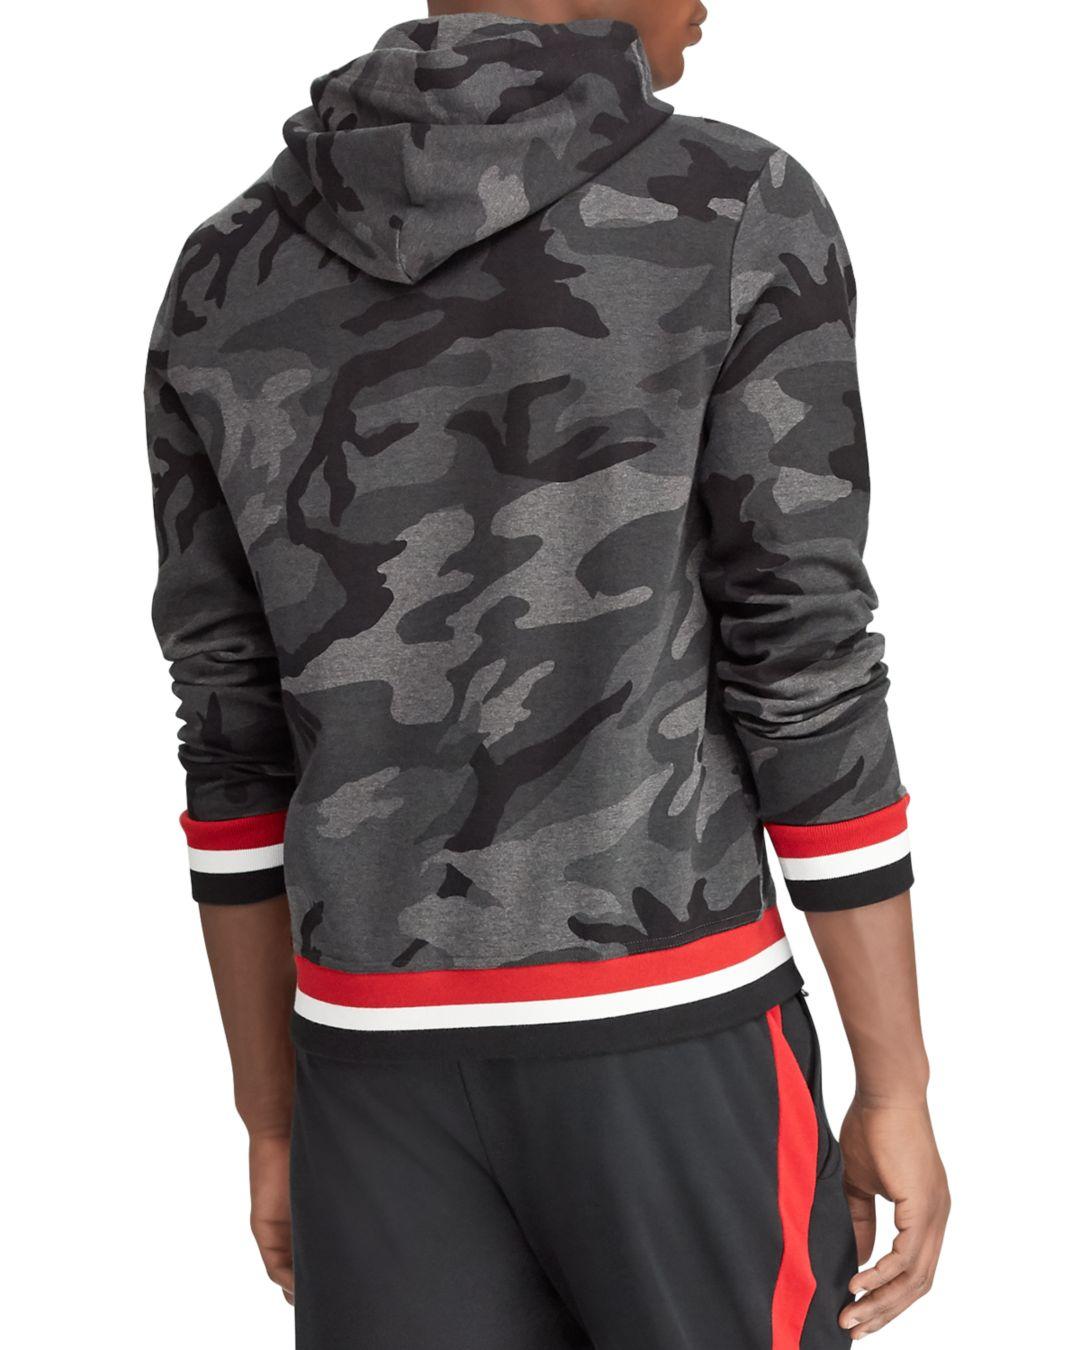 Polo Ralph Lauren Cotton Camouflage Hooded Sweatshirt in Charcoal rl Camo  (Gray) for Men - Lyst